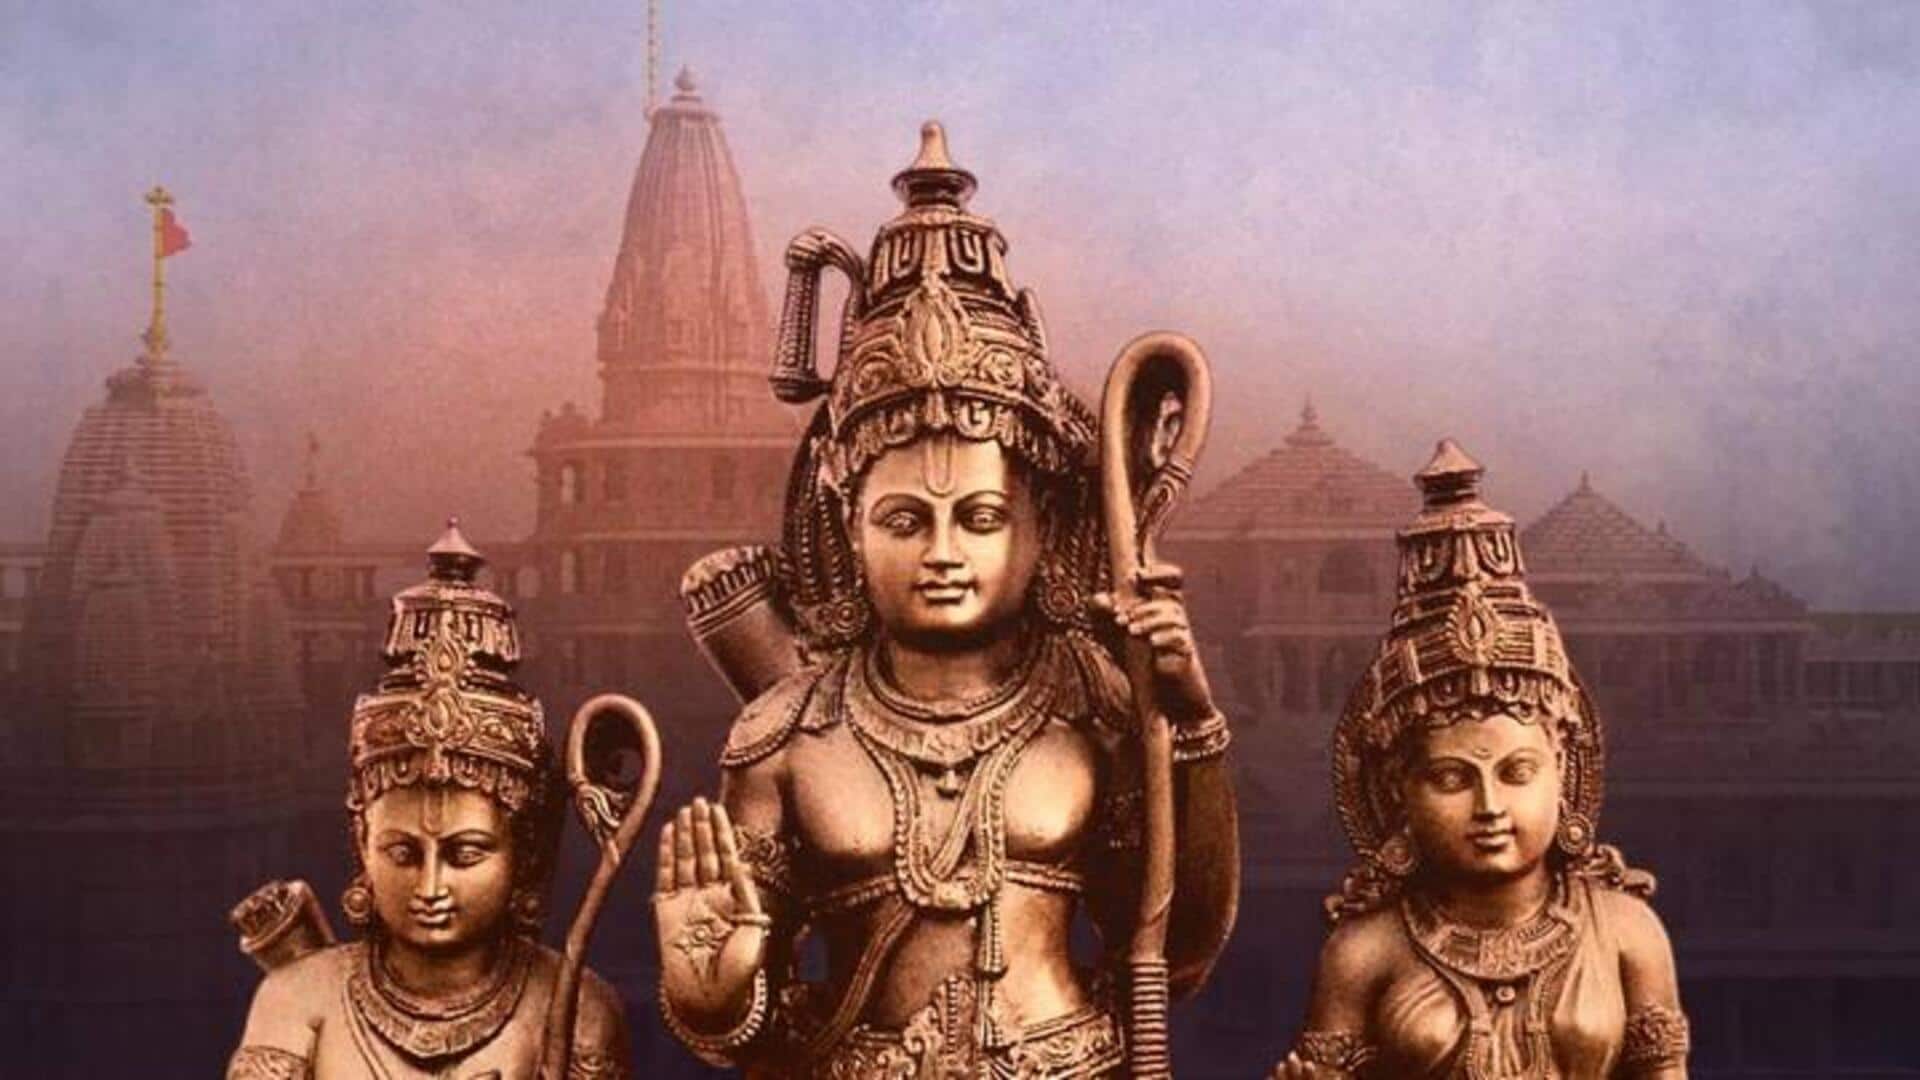 Ram Mandir inauguration: Which states have announced holiday